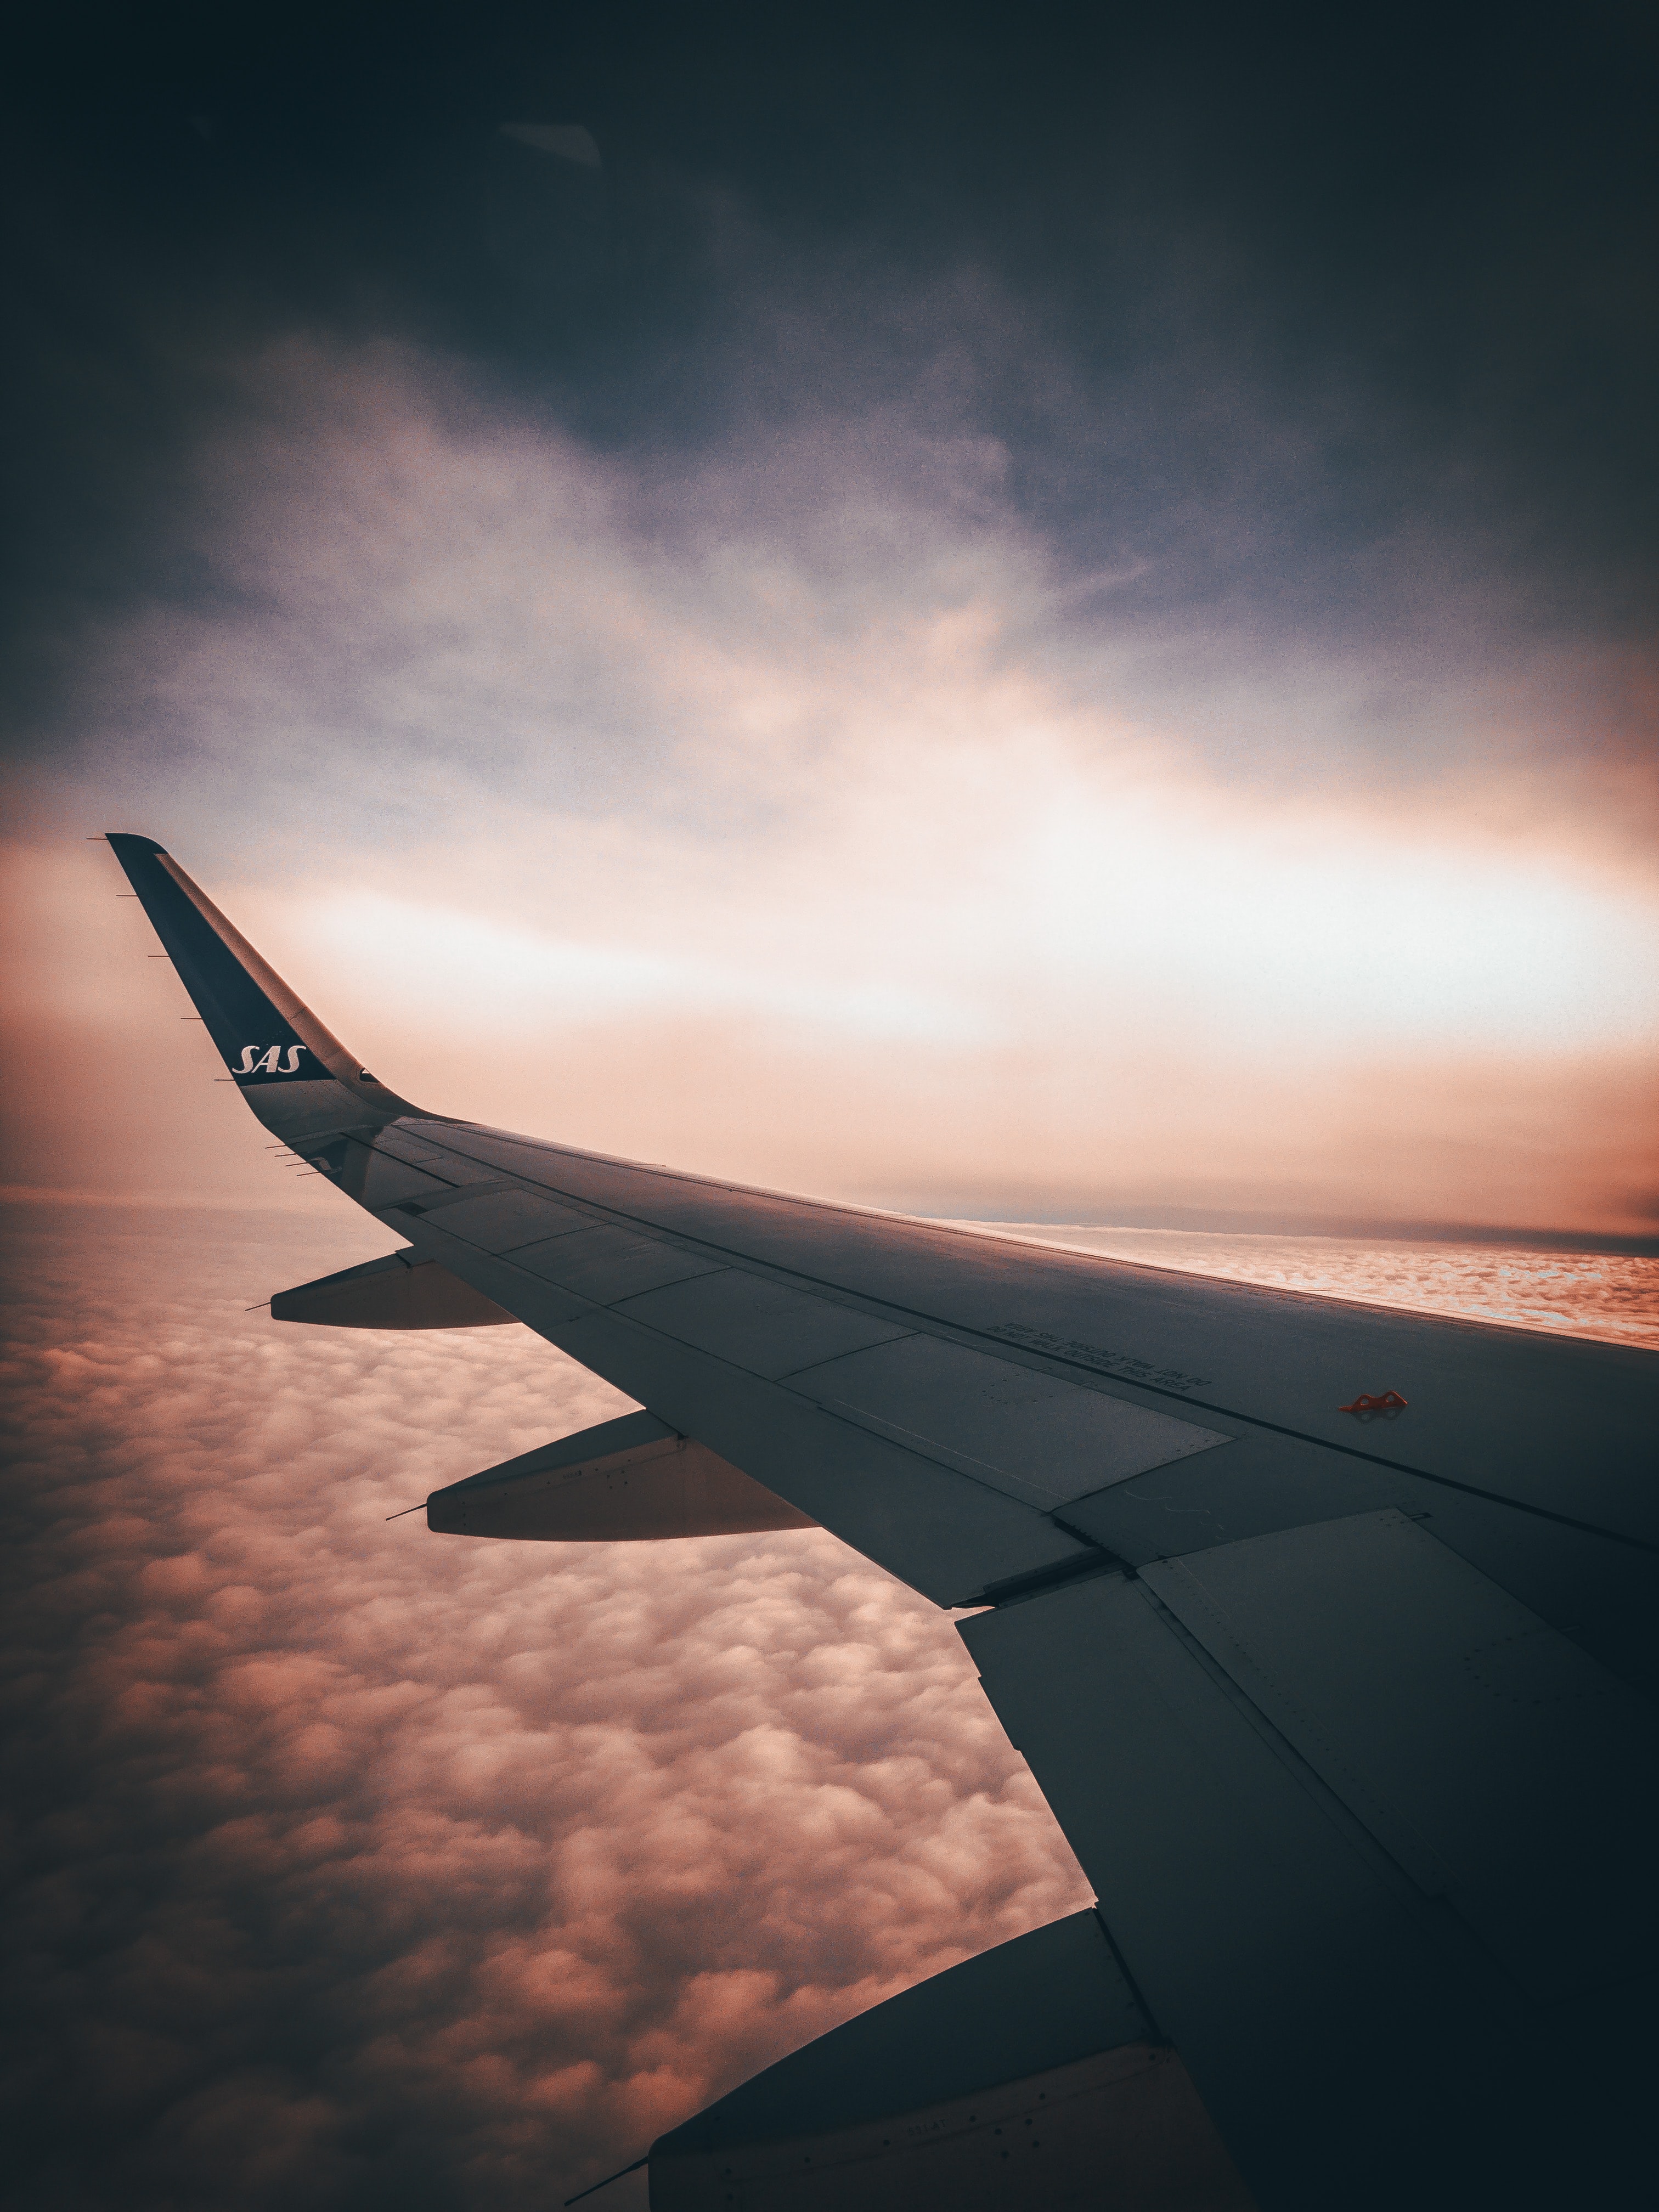 plane, wing, sky, twilight, clouds, miscellanea, miscellaneous, dusk, airplane, view